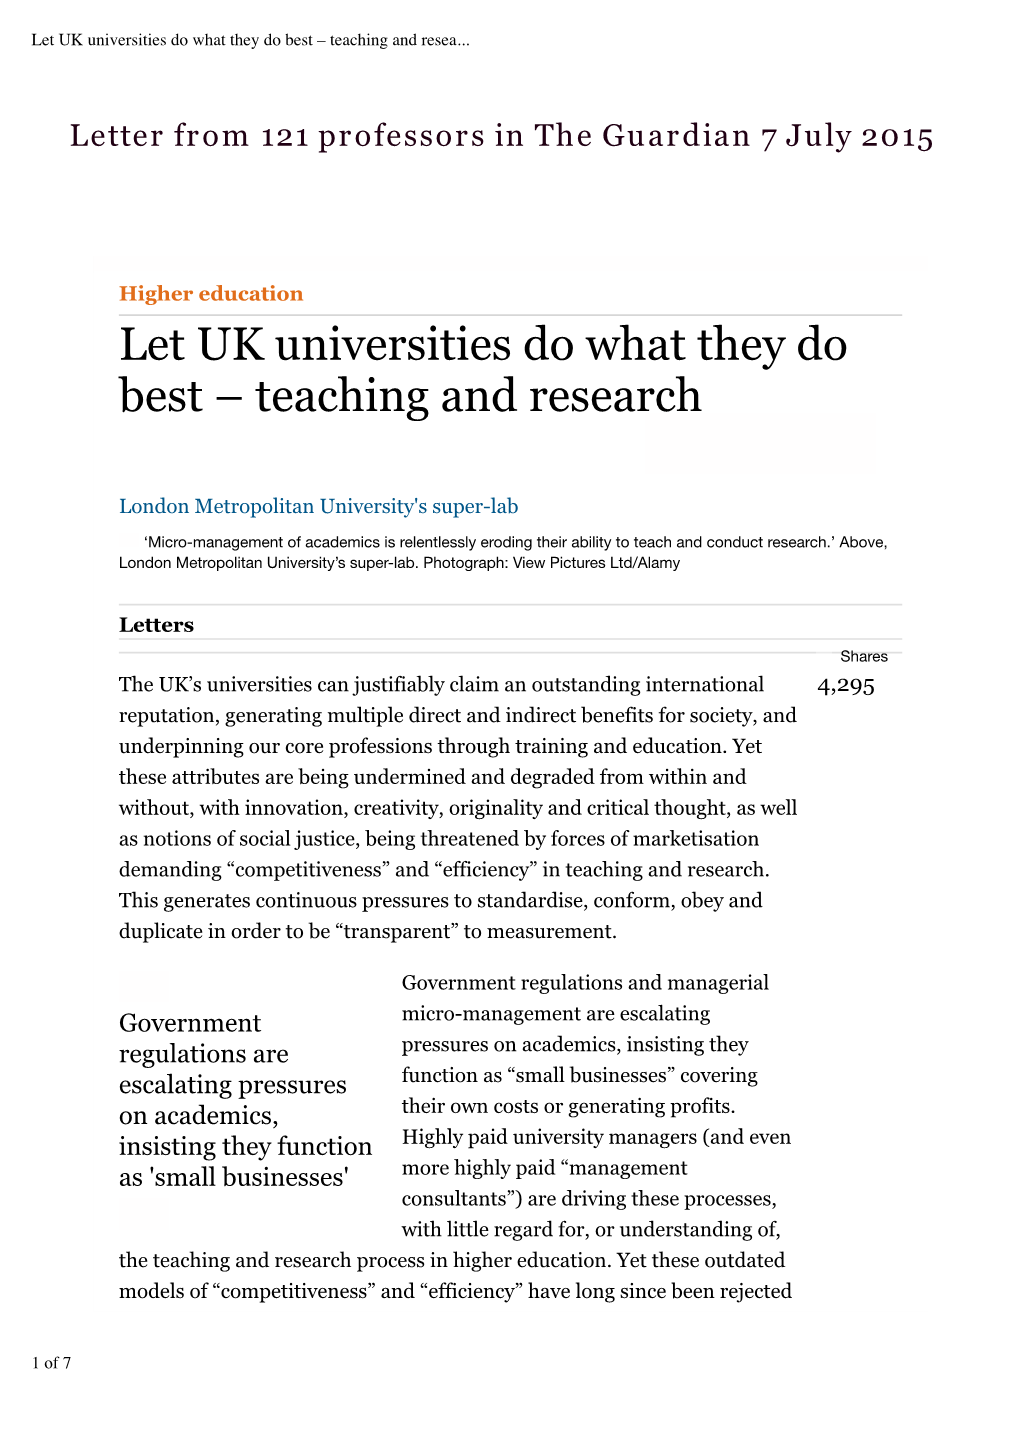 Let UK Universities Do What They Do Best – Teaching and Research